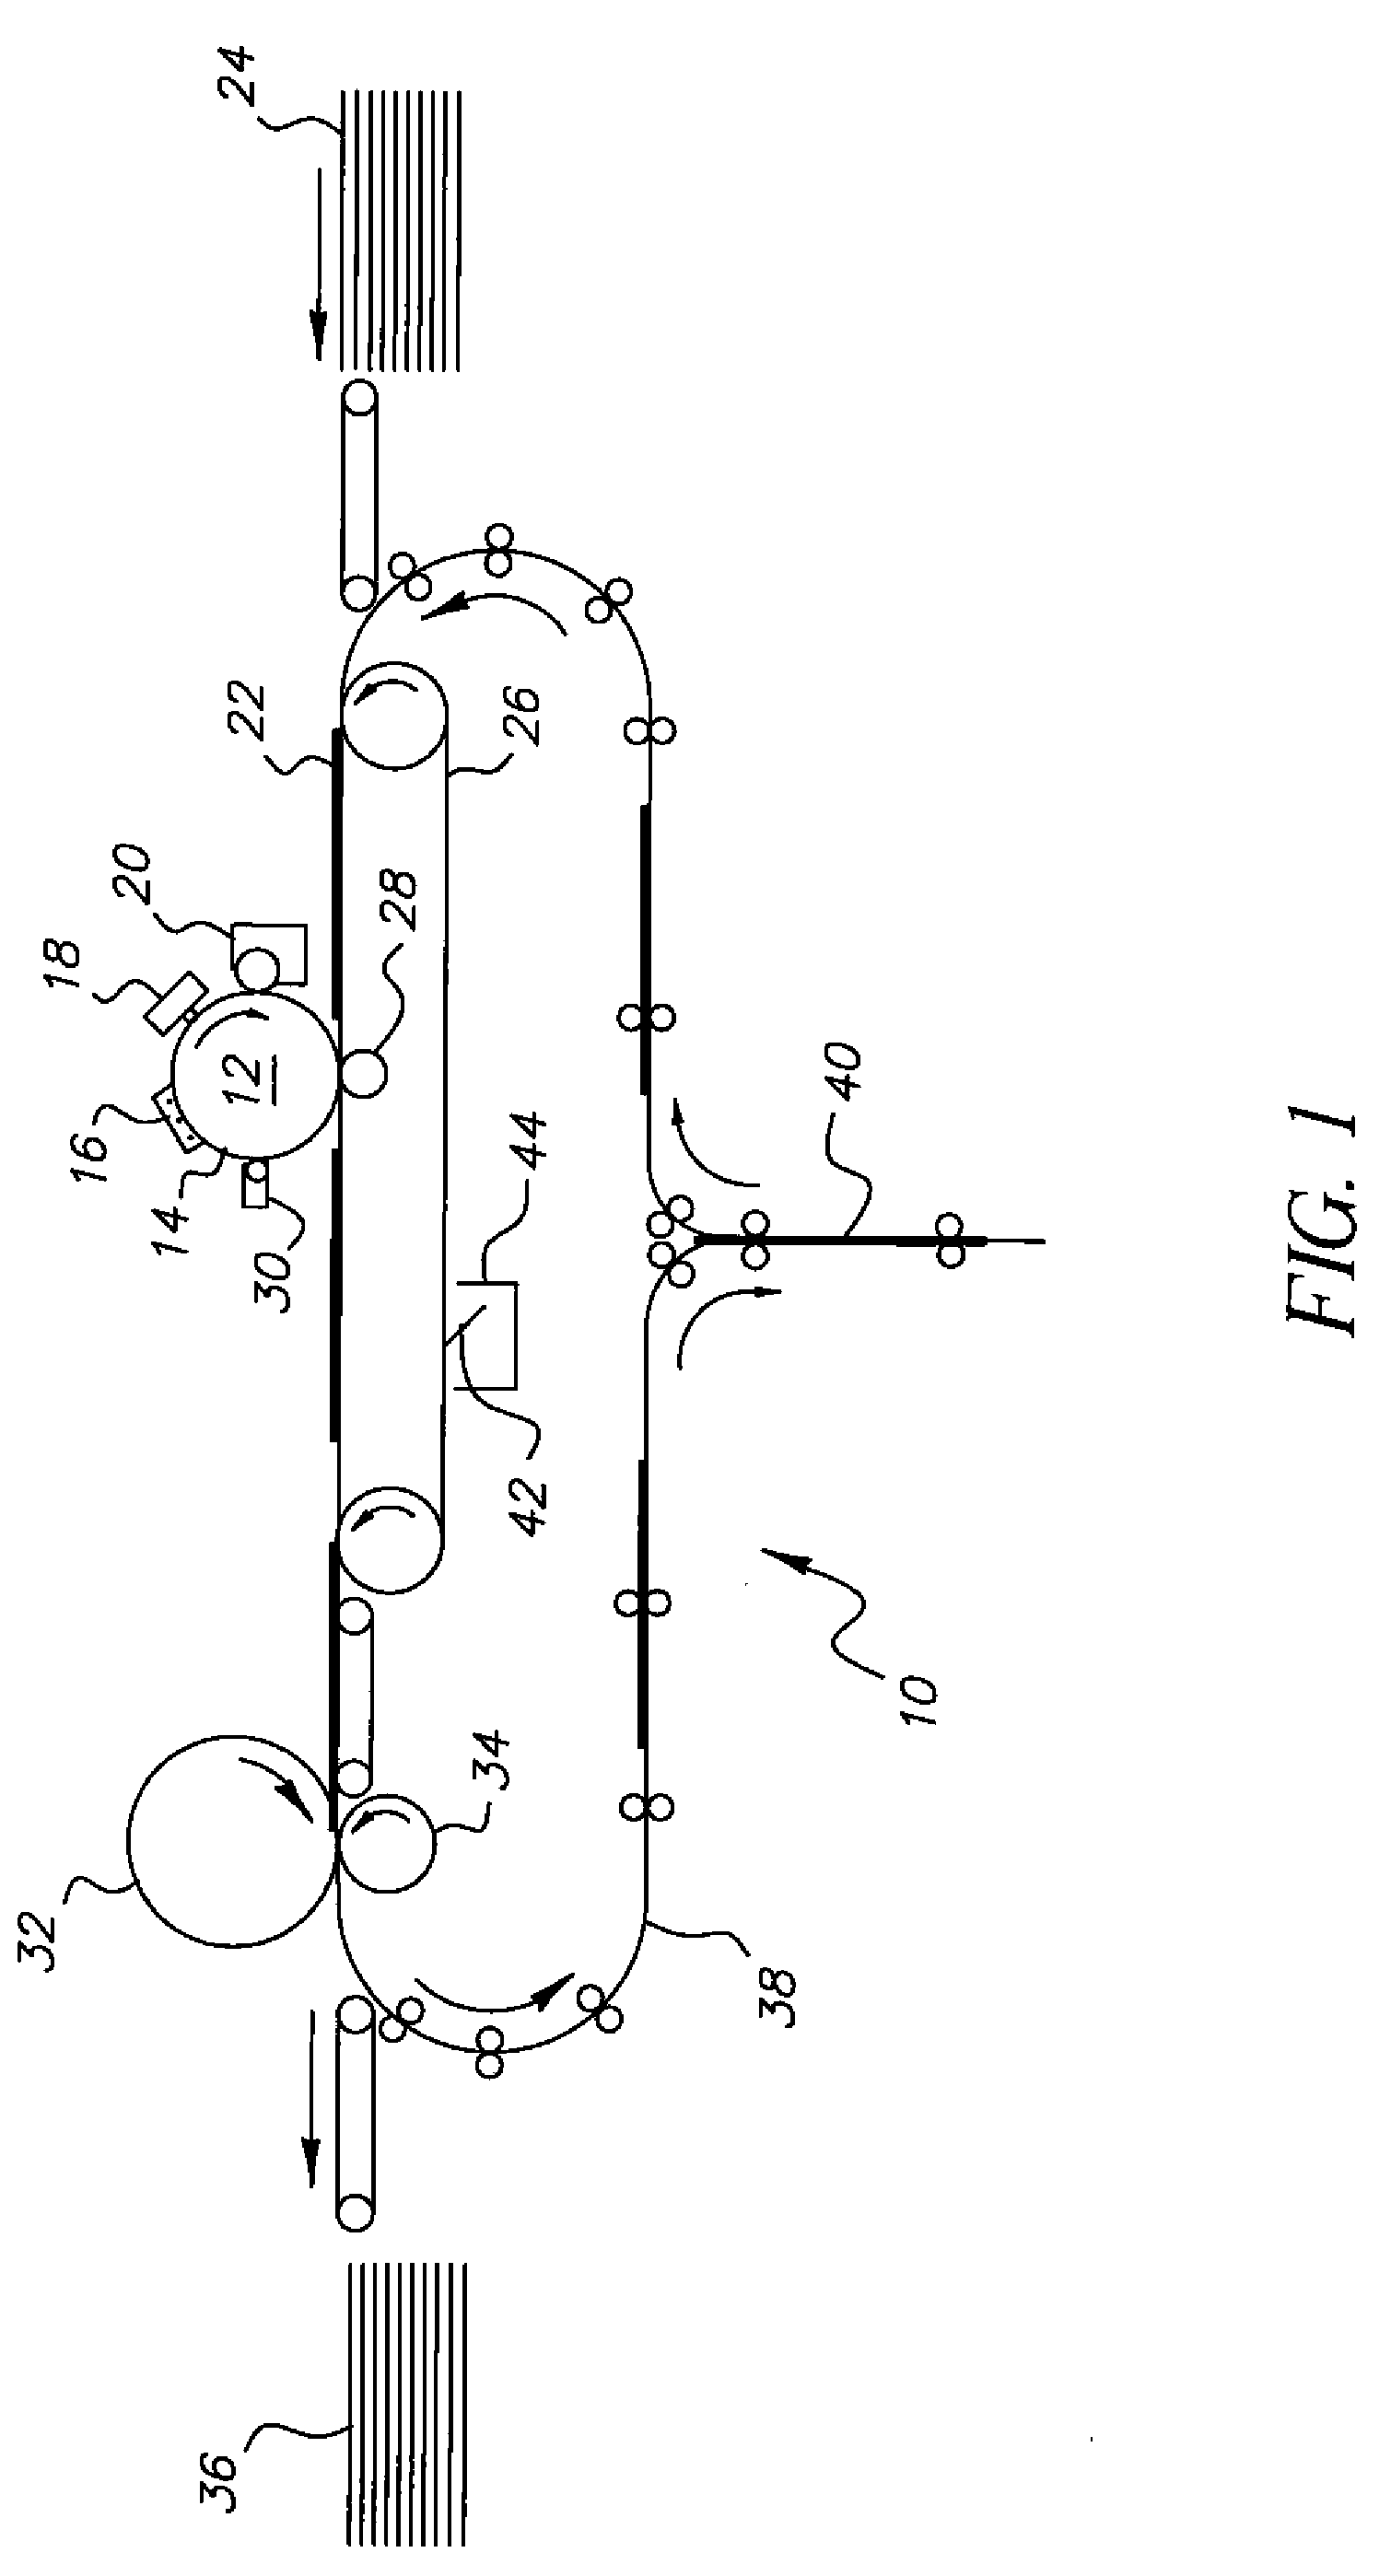 Printed electronic circuit boards and other articles having patterned coonductive images